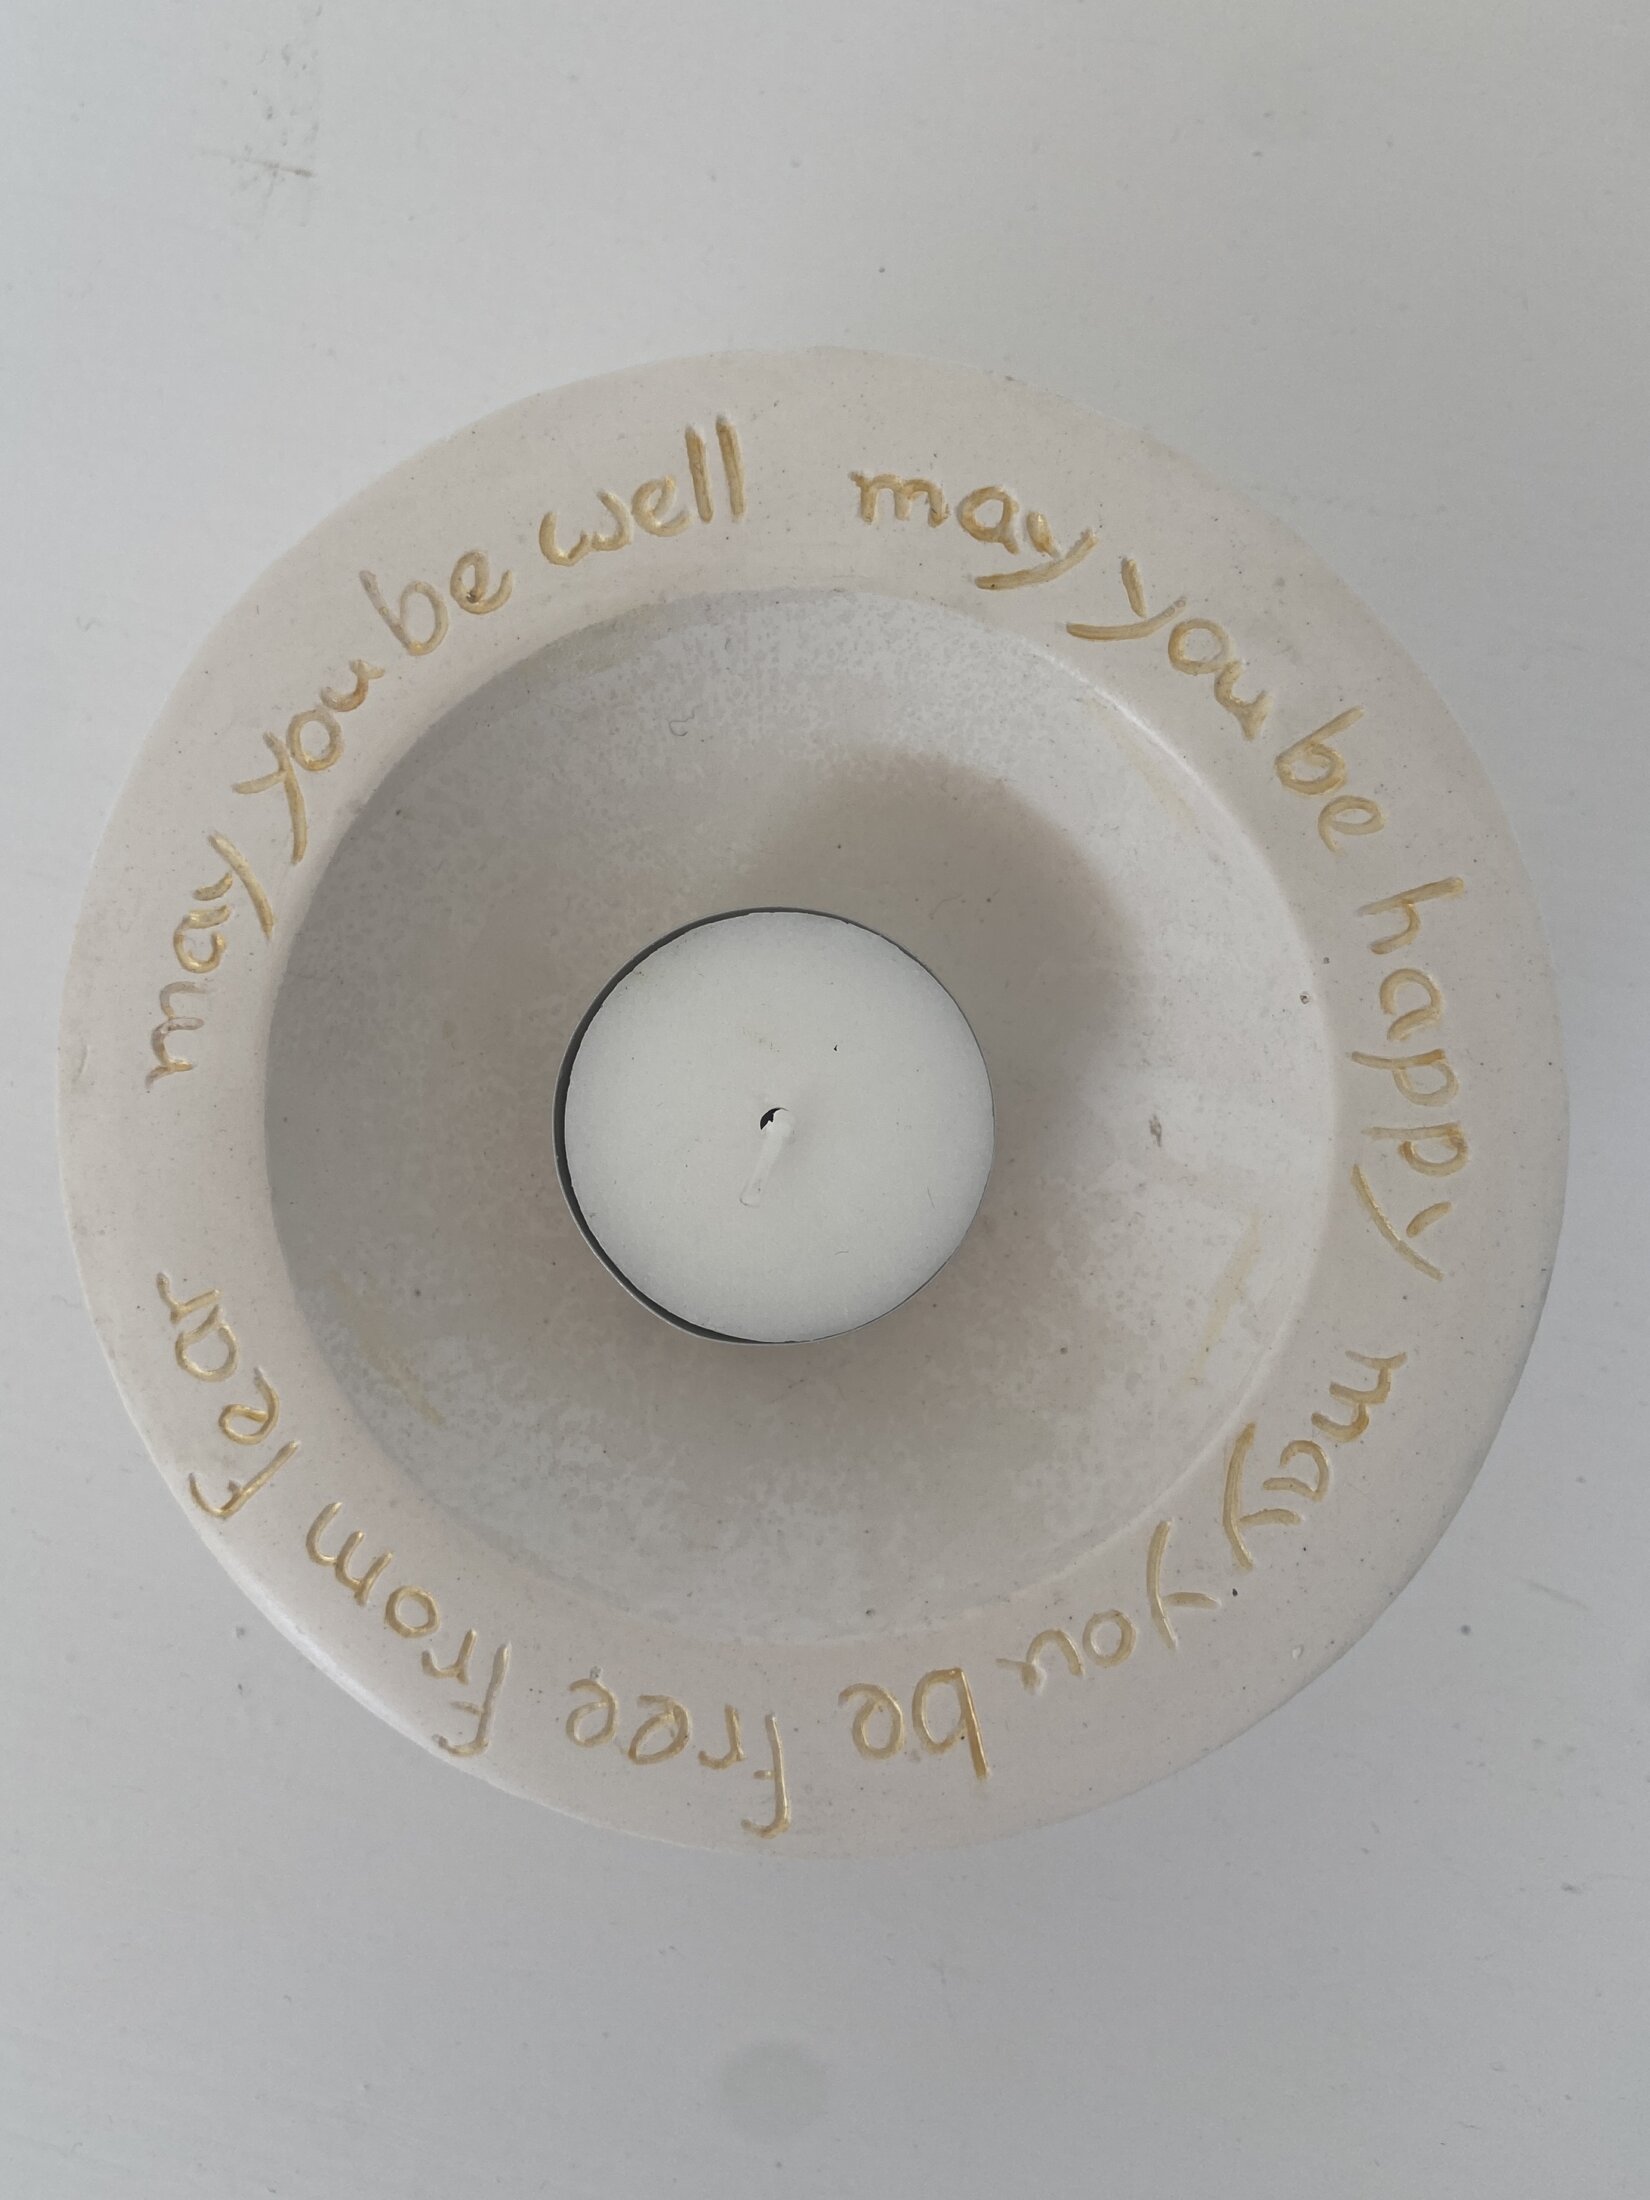 Clare Cummings 'May you be ...' Plaster bowl